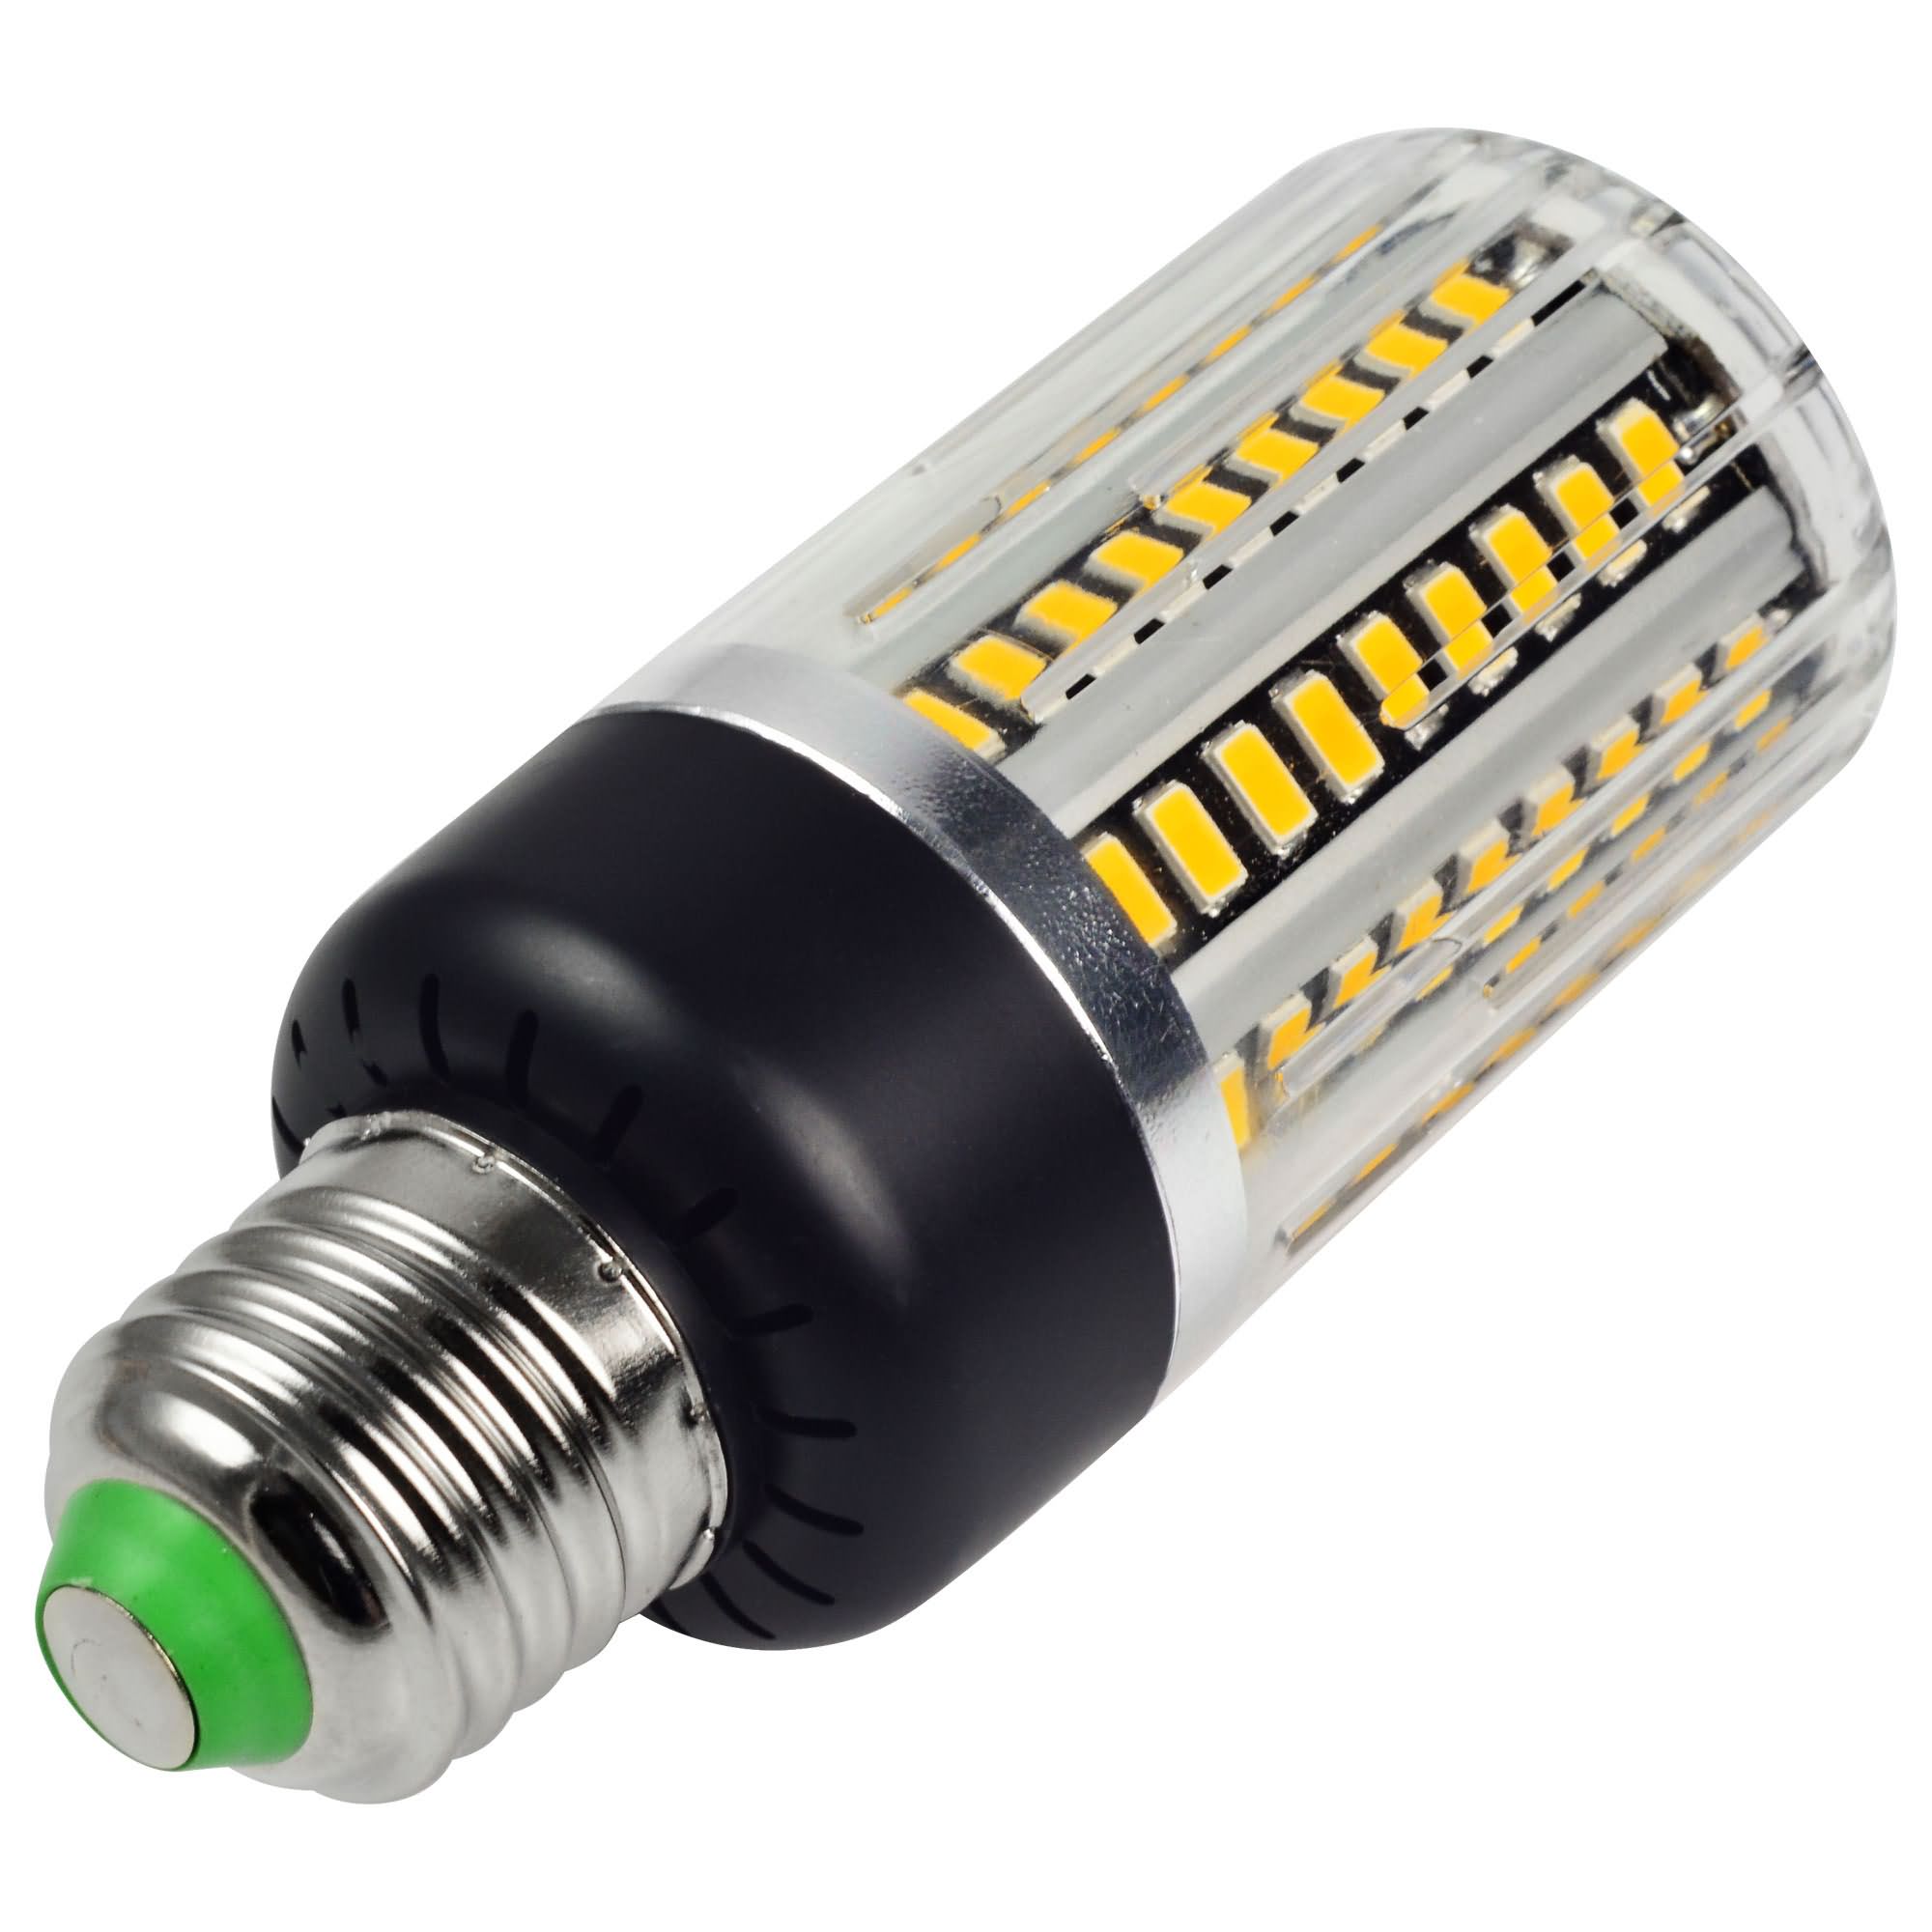 Mengsled Mengs E27 10w Led Corn Light 84x 5733 Smd With